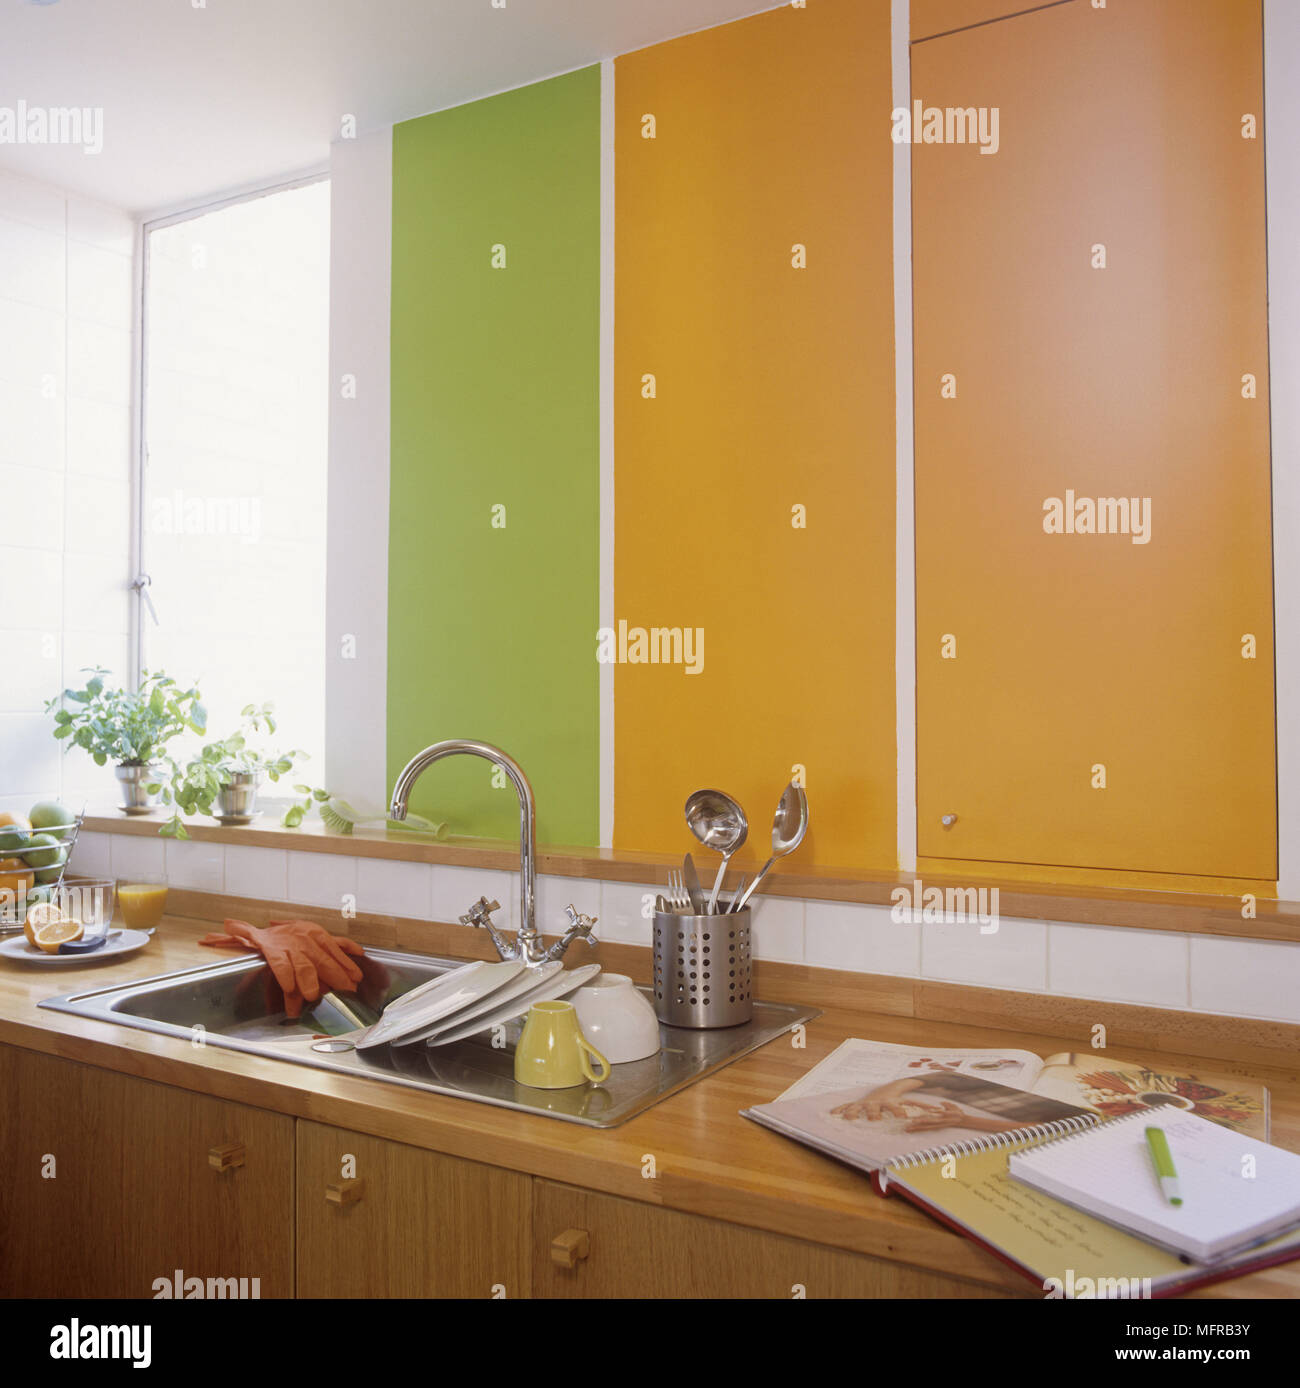 Wooden units with orange and green laminate cupboards clean dishes and recipe book Stock Photo